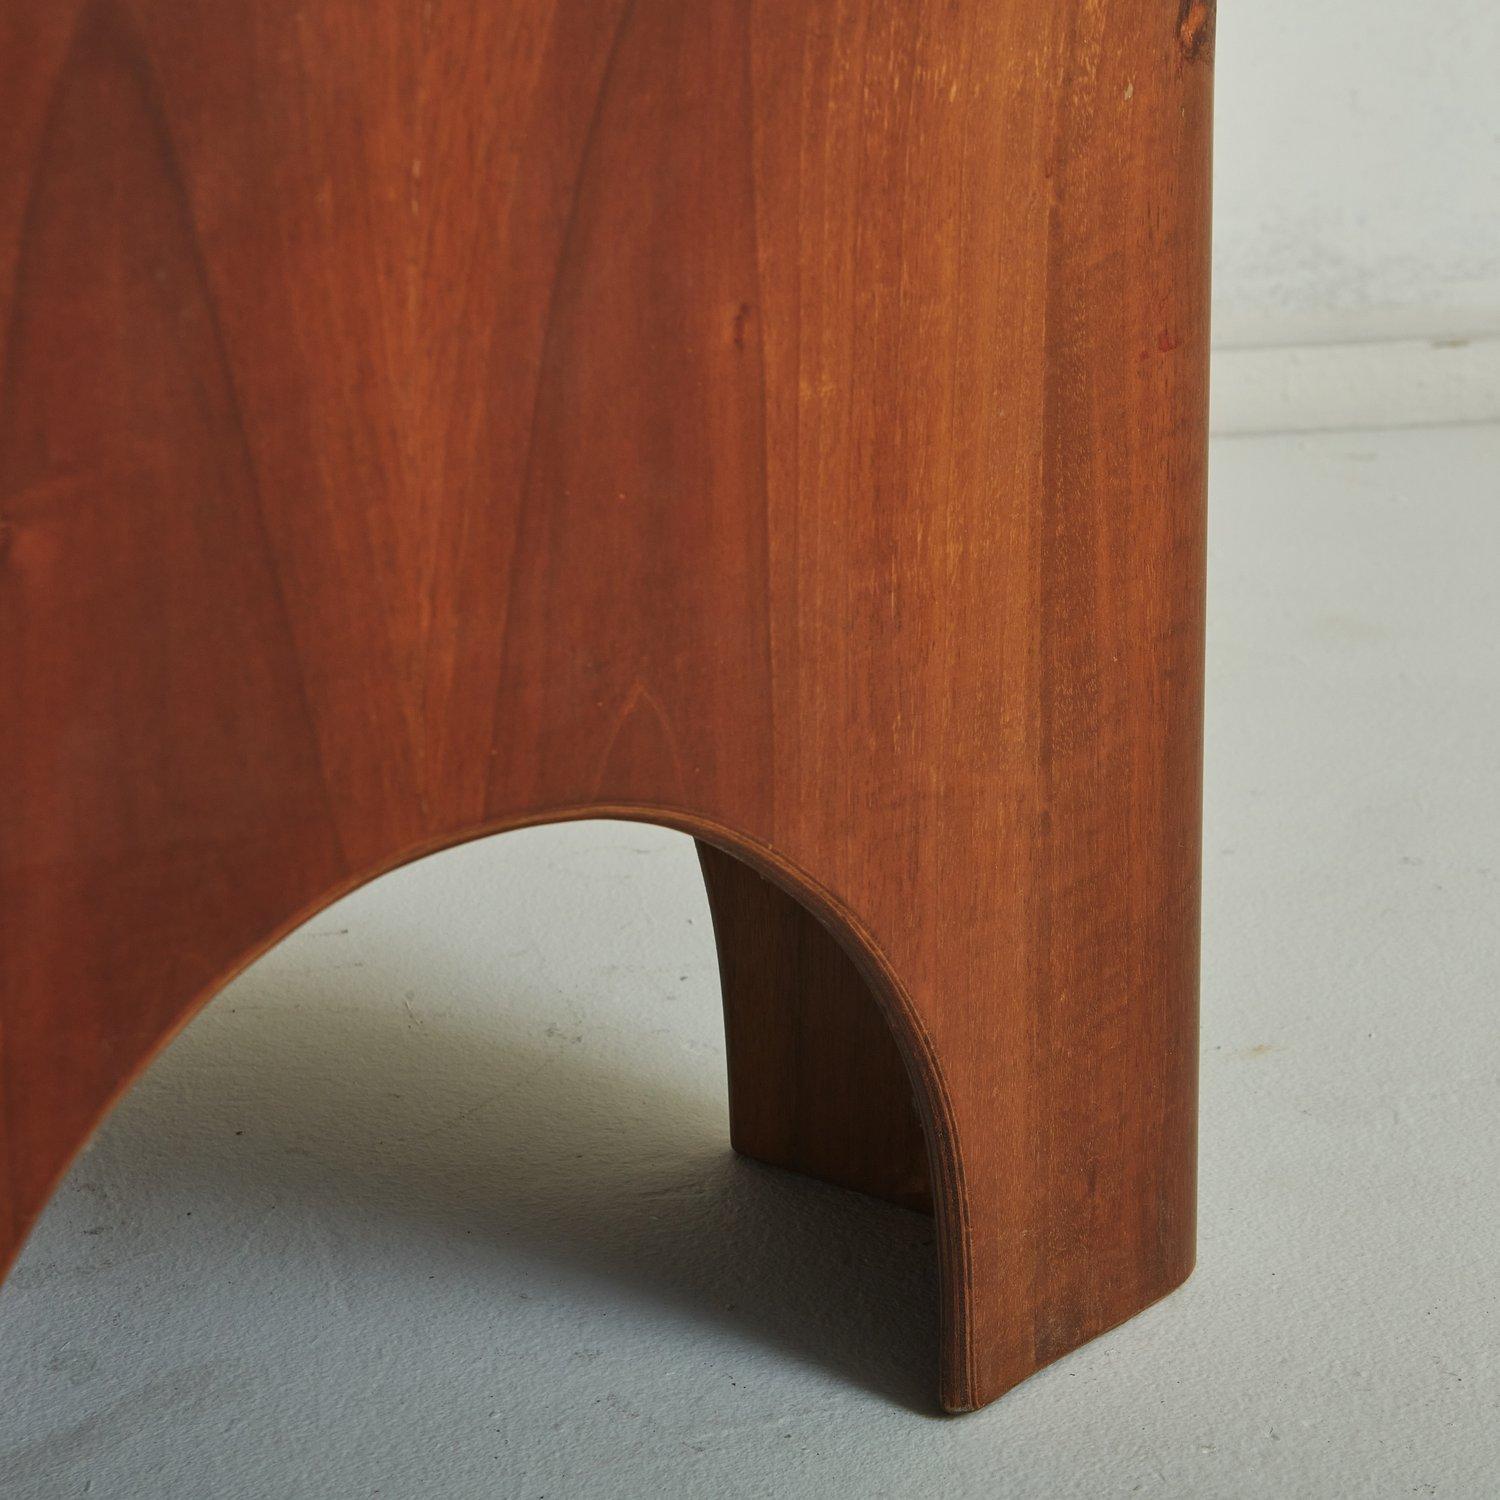 Walnut + Leather 'Arcata' Chair by Gae Aulenti for Poltronova, Italy 1968 For Sale 3